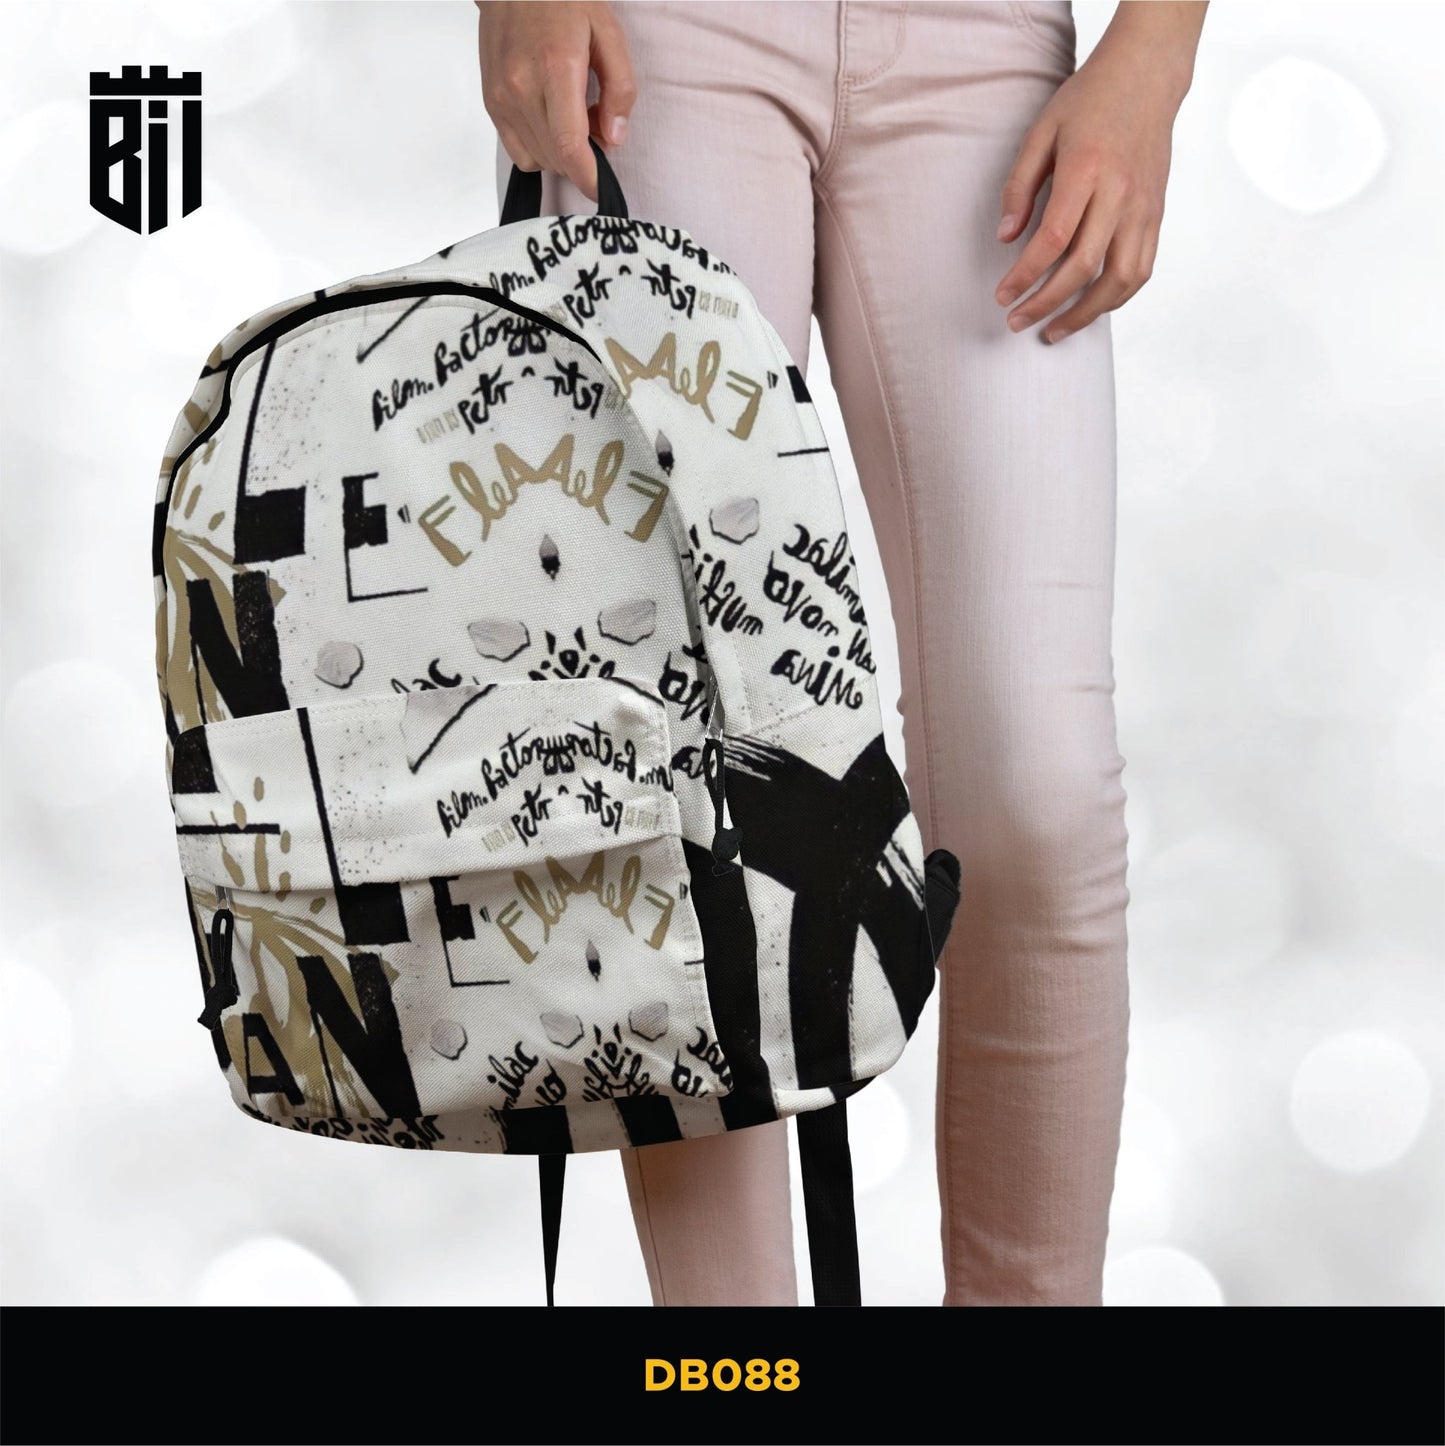 DB088 Typography Art Allover Printed Backpack - BREACHIT